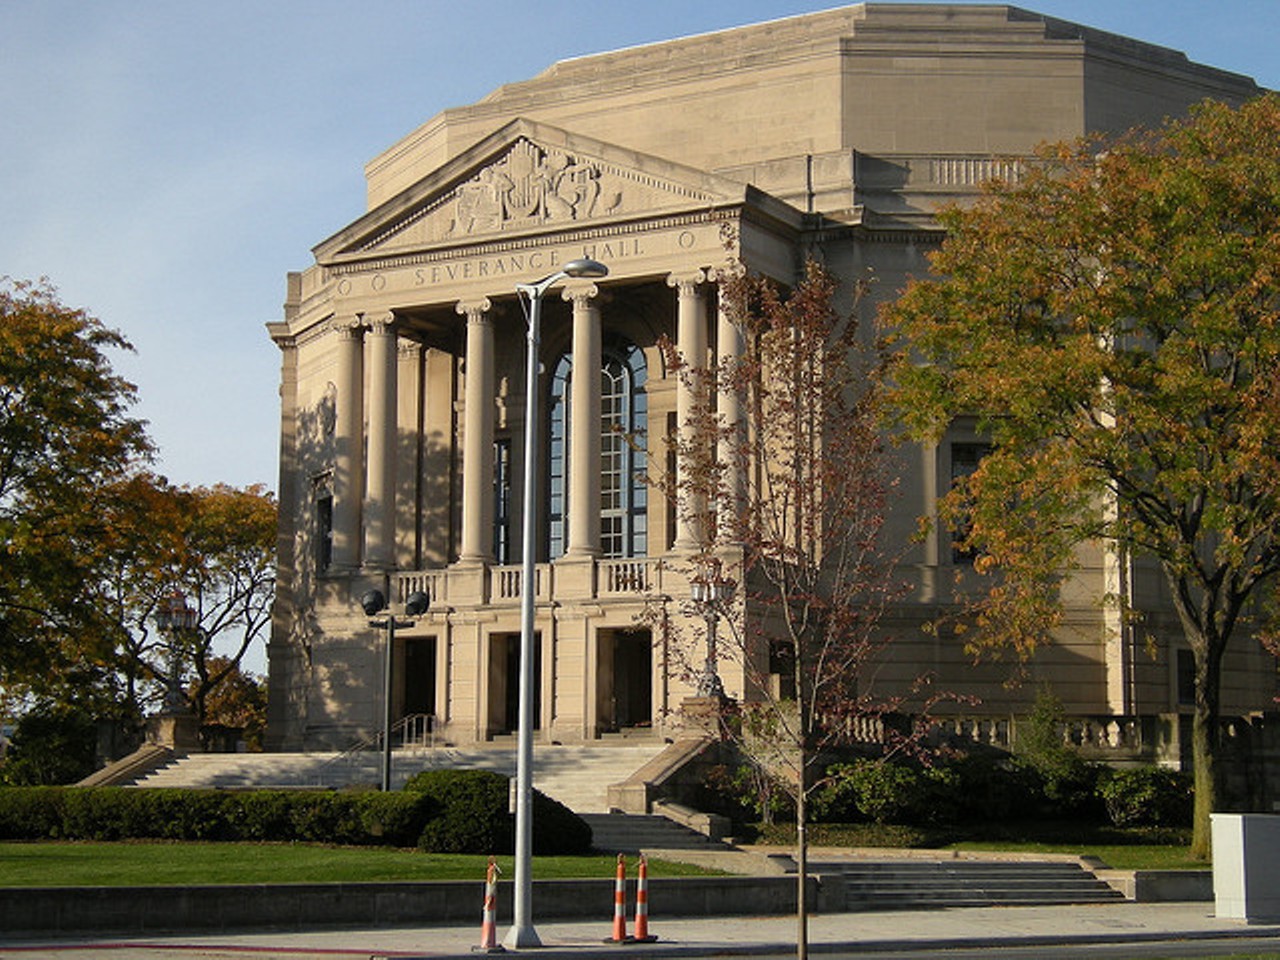 Severance Hall
11001 Euclid Ave., (216) 231-7300
If your're the couple looking to throw down and impress all of your guests, Severance Hall, in all its opulence, is for you. No matter what sort of ceremony and reception you are looking for, the hall's event planning crew will help you work out every perfect detail. 
Photo via redazadi/Flickr CC